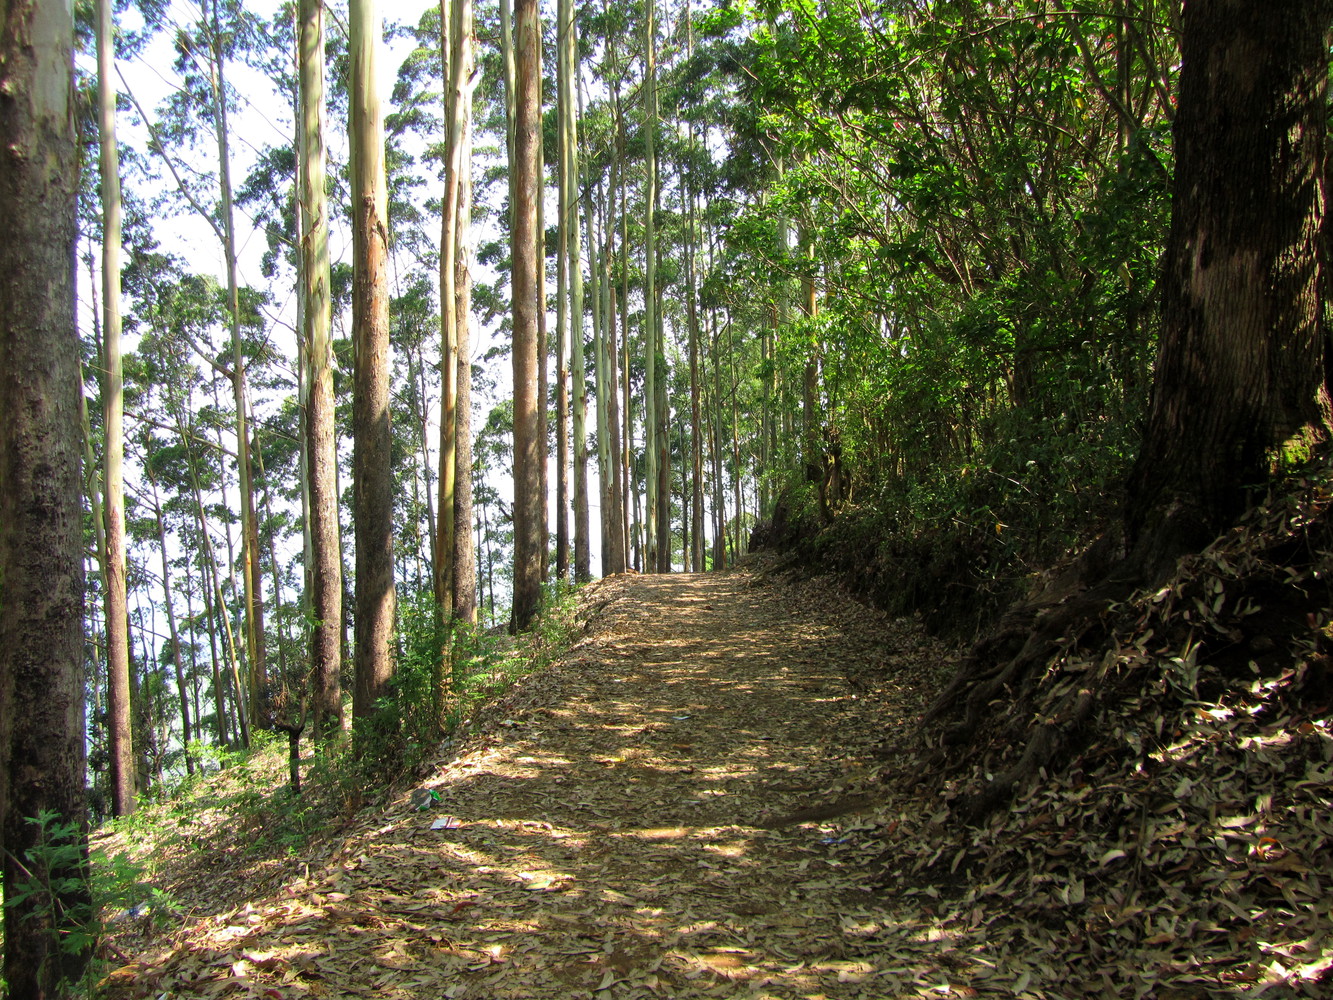 A mud path between tall trees along the slope of a hill